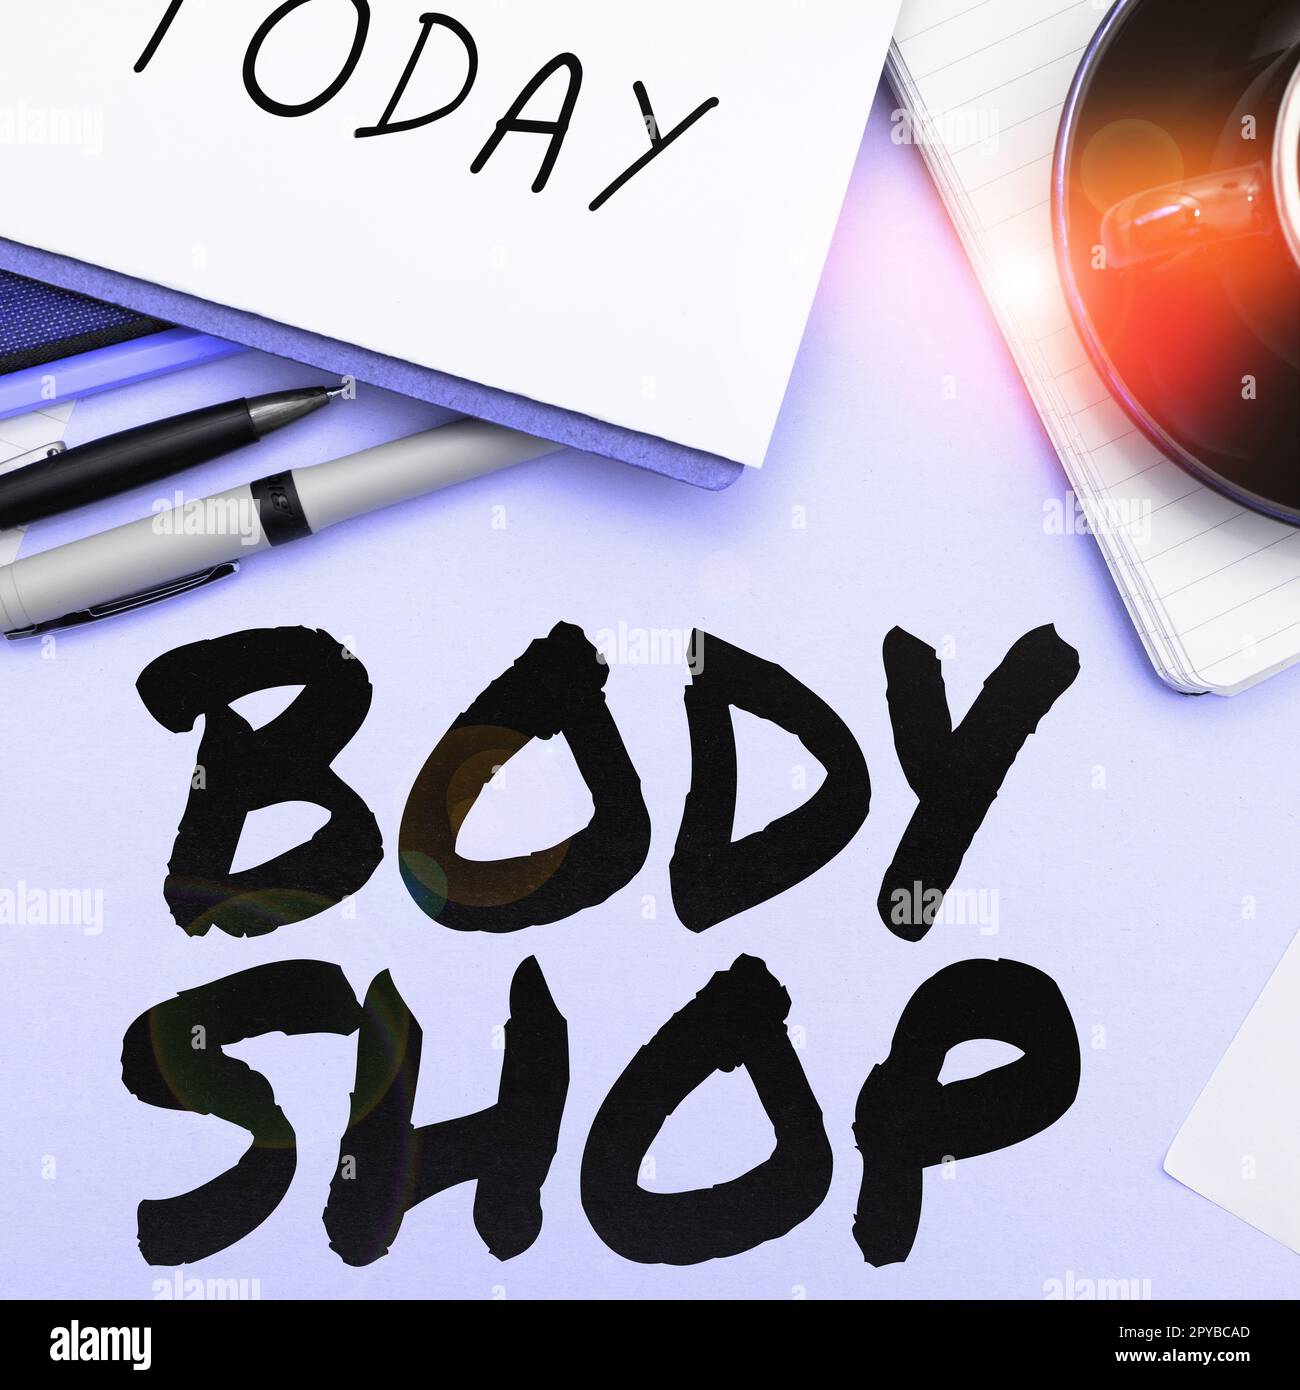 Text caption presenting Body Shop. Internet Concept a shop where automotive bodies are made or repaired Stock Photo